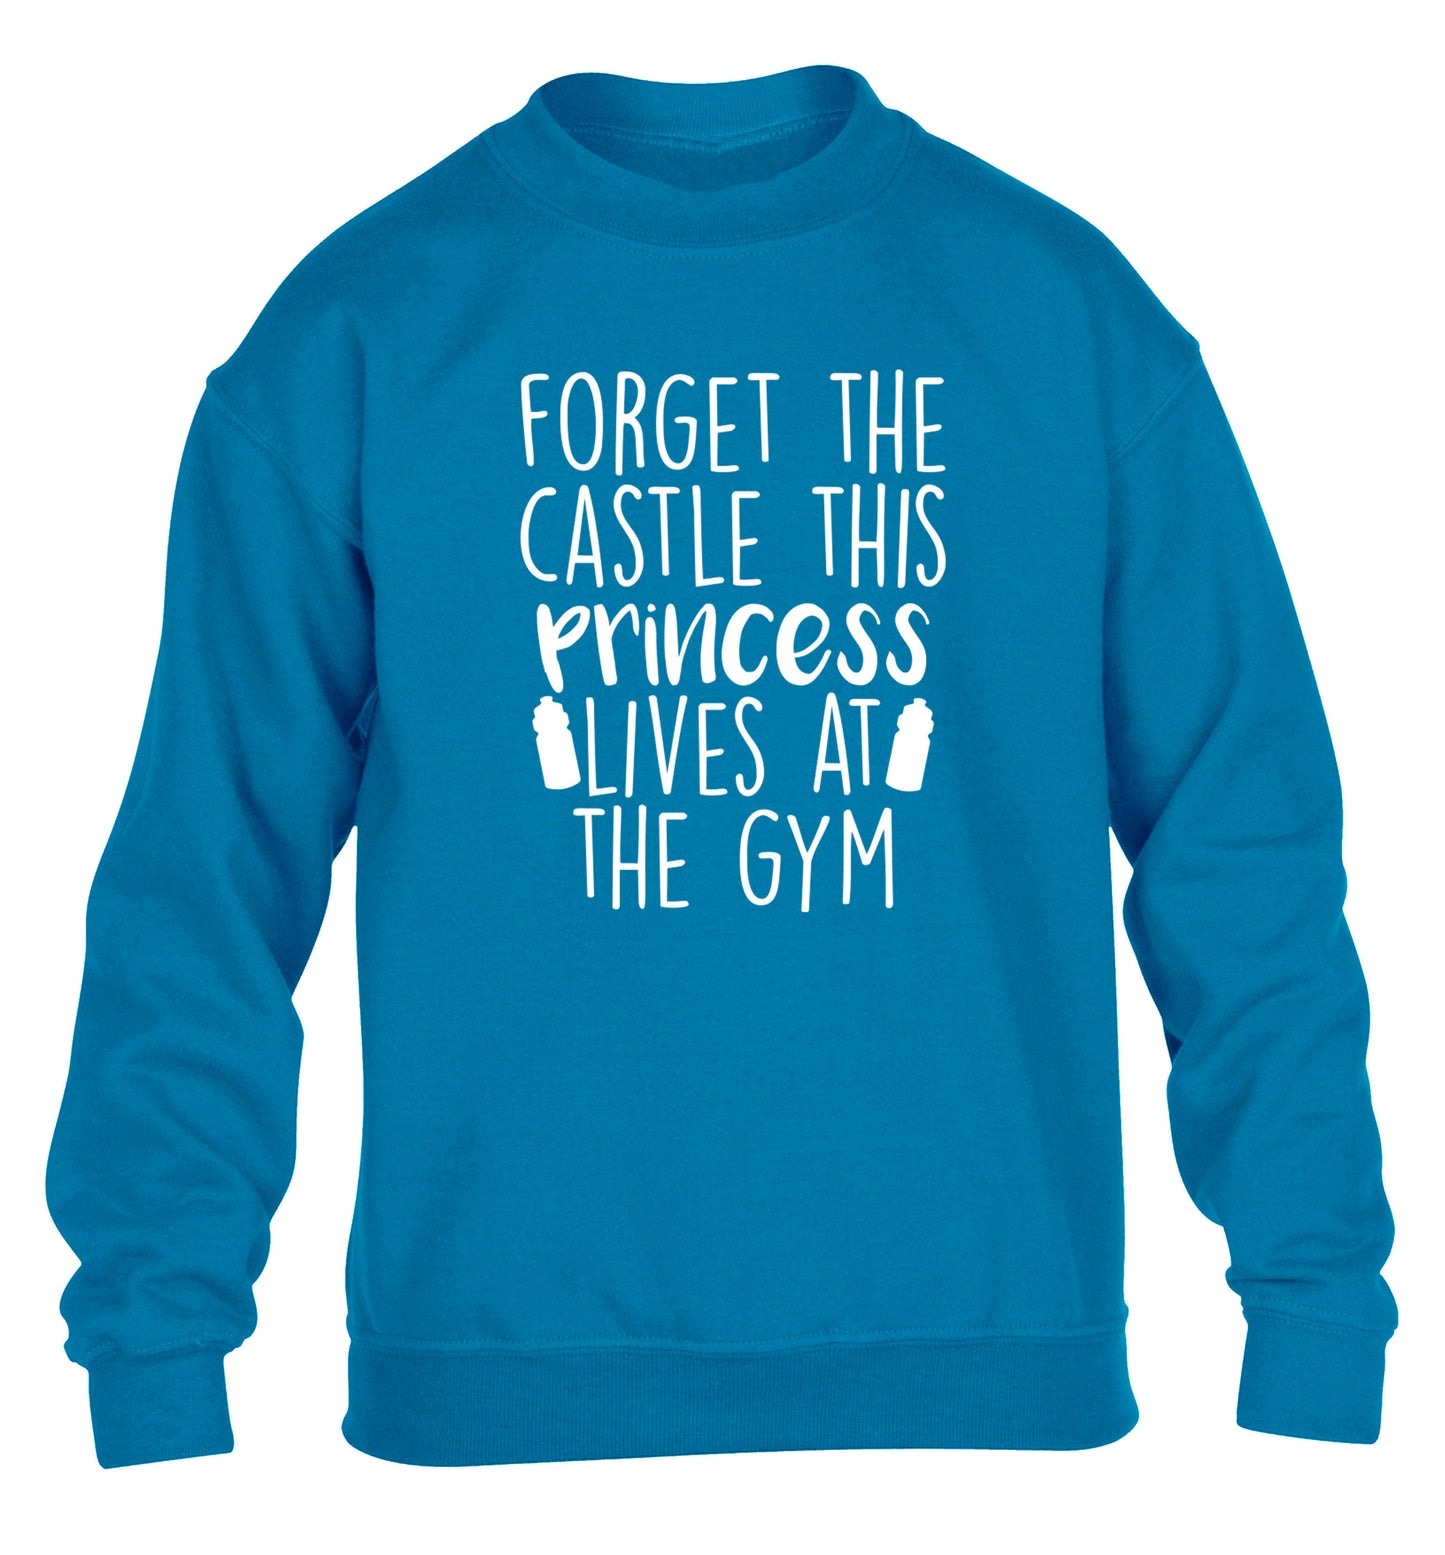 Forget the castle this princess lives at the gym children's blue sweater 12-14 Years